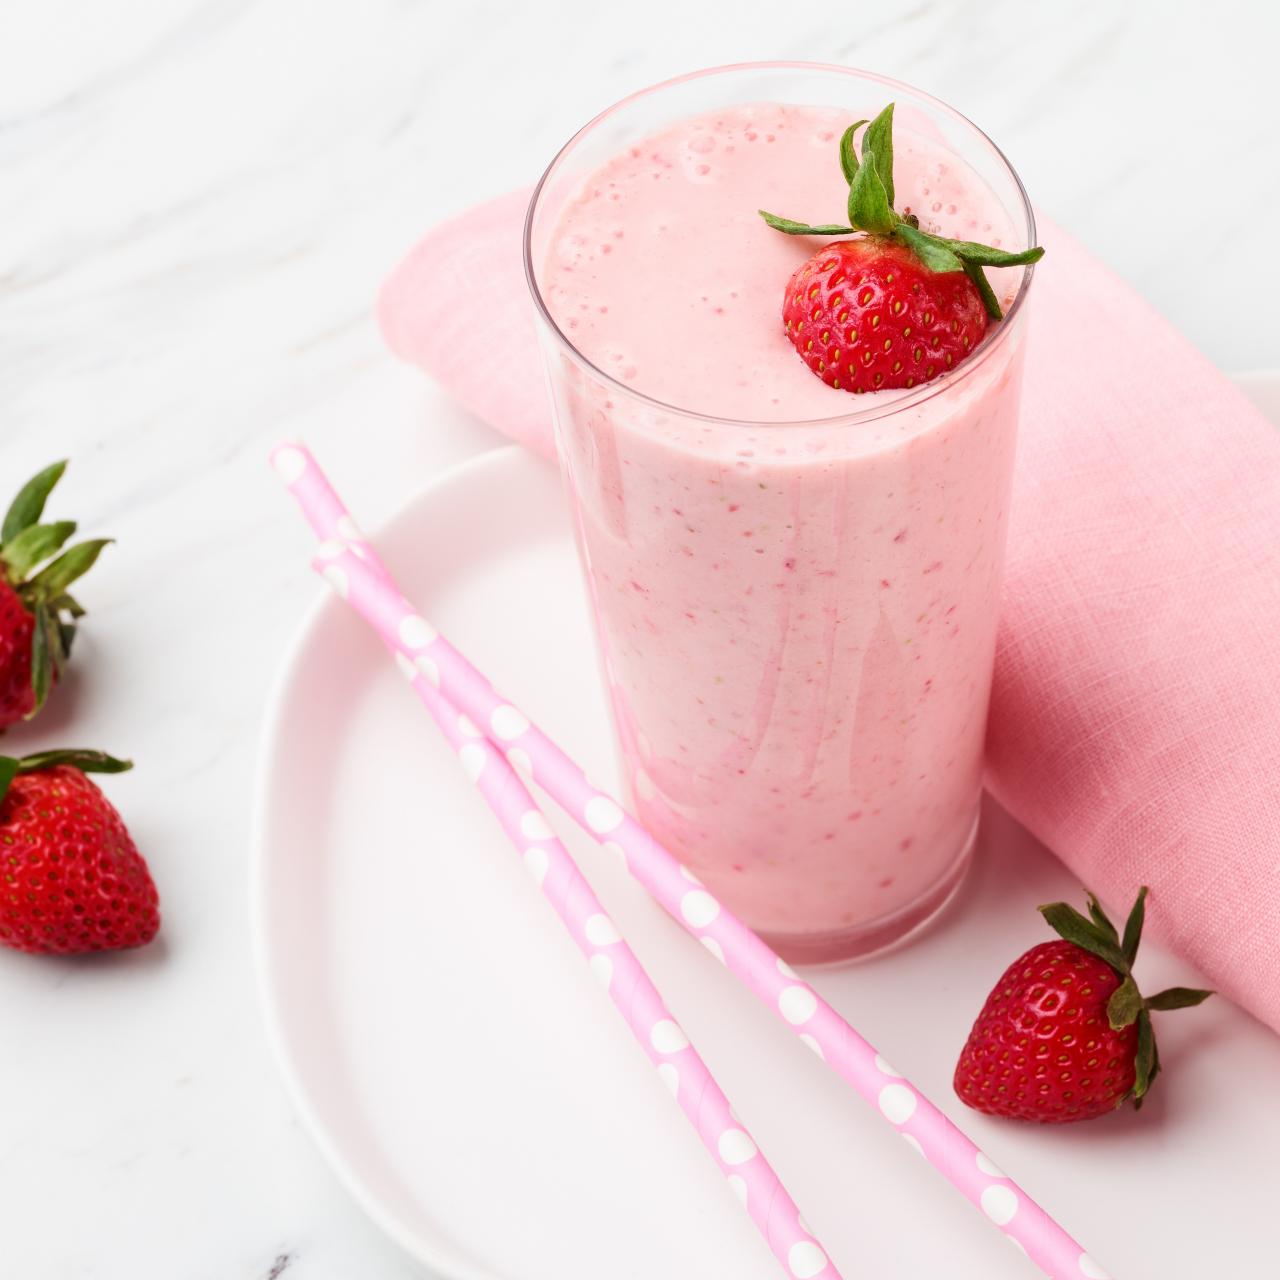 ad Watch me Make a Chocolate Strawberry Banana protein shake With